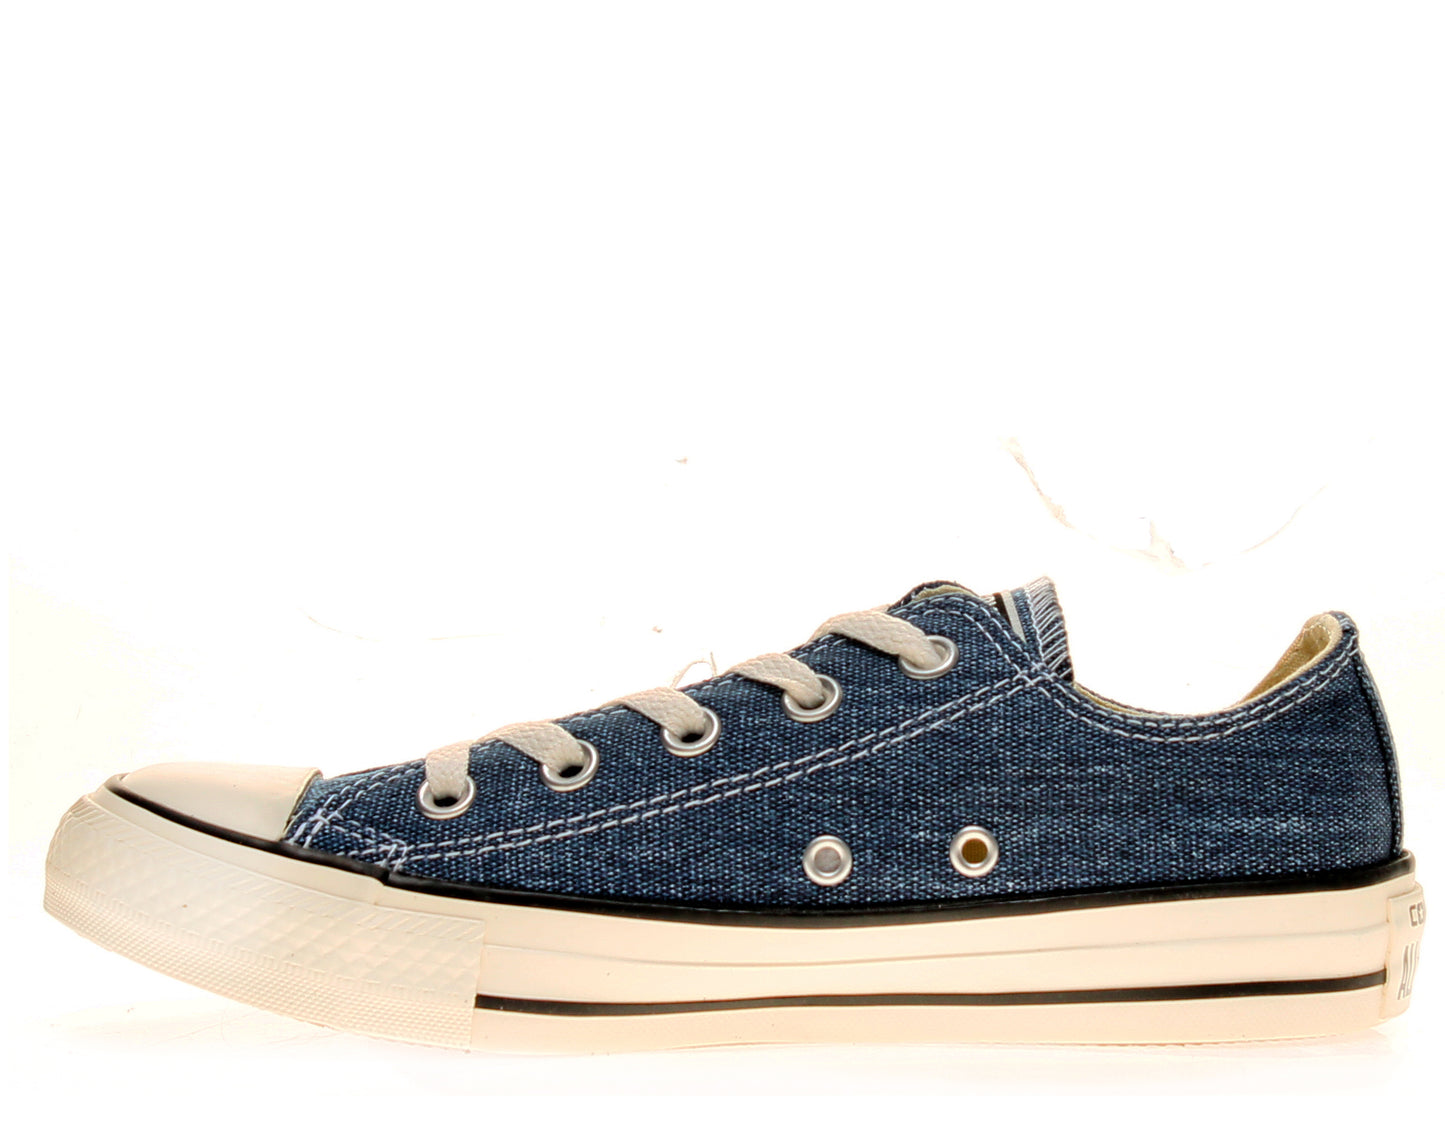 Converse Chuck Taylor All Star OX Washed Canvas Low Top Sneakers